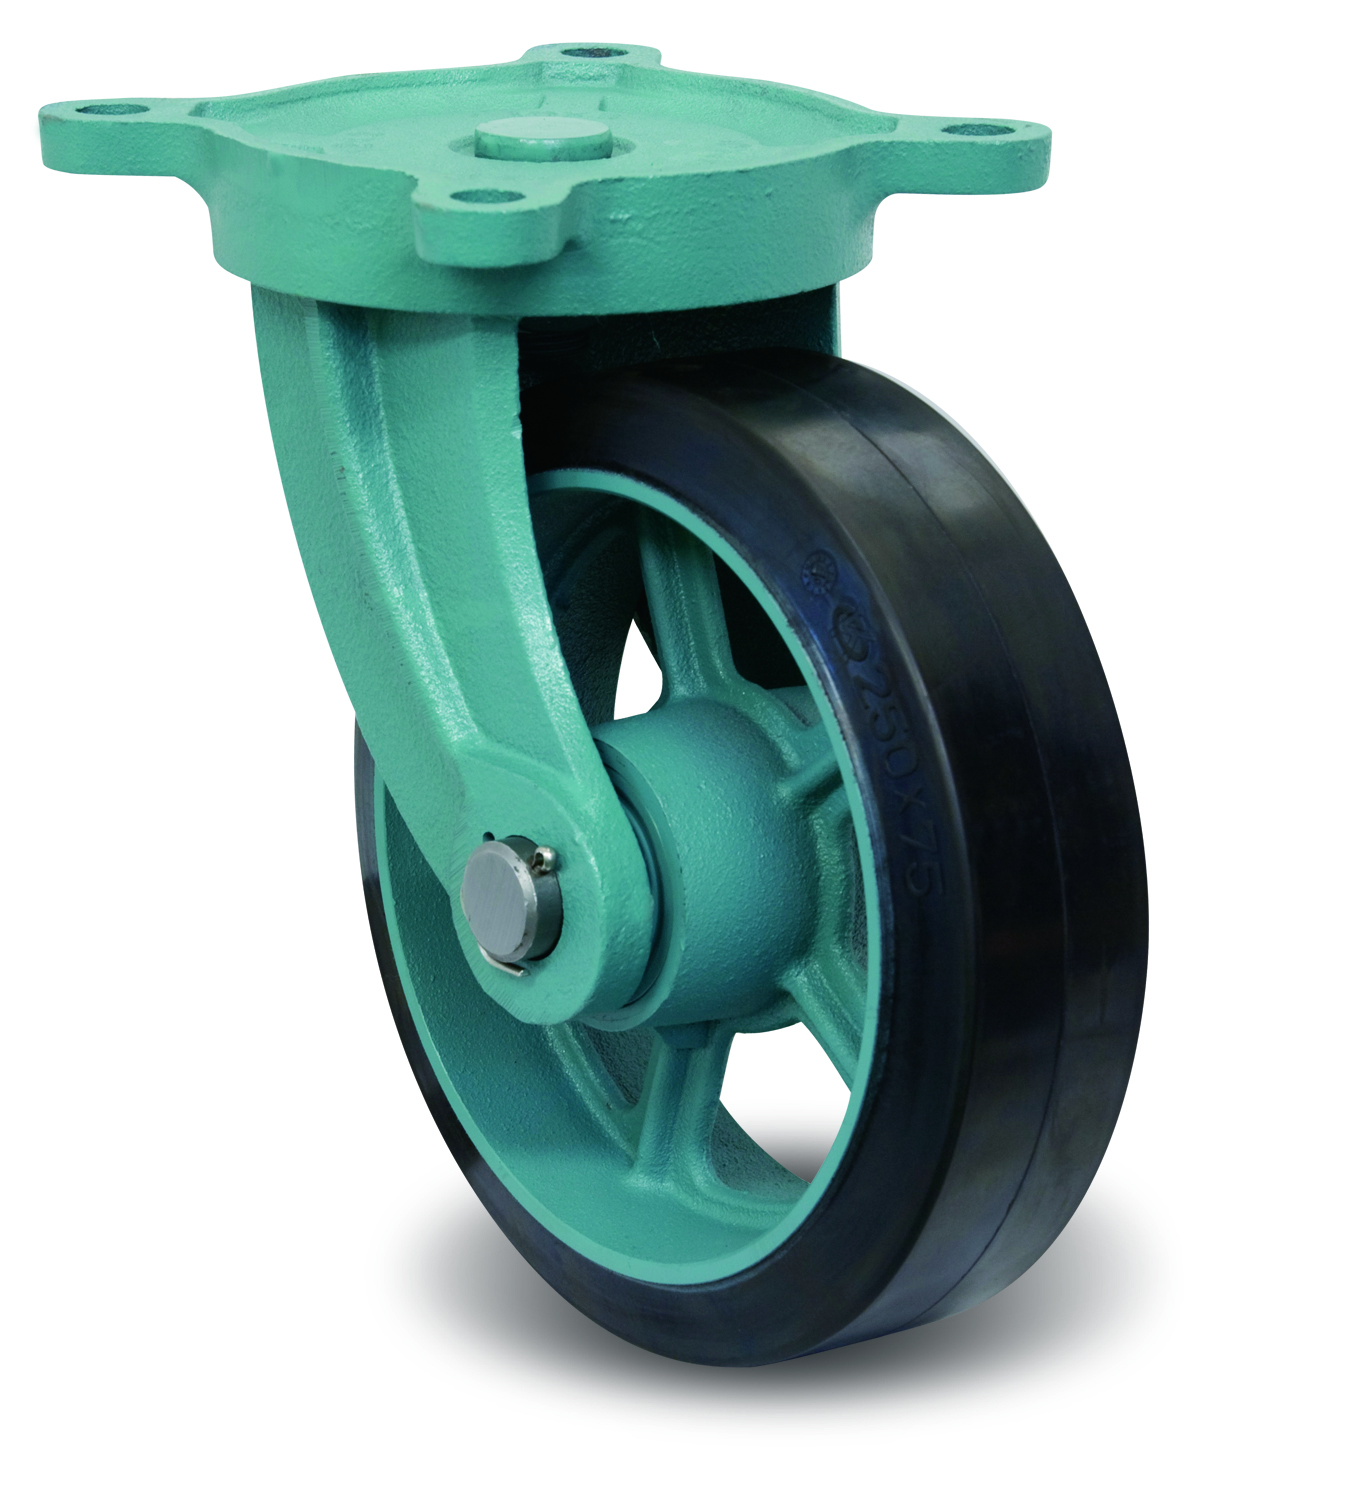 Casters - Rubber with Ductile Steel Swivel Plate, MG-O Series with Bracket, E/MG-O Series. EMG-O300X65